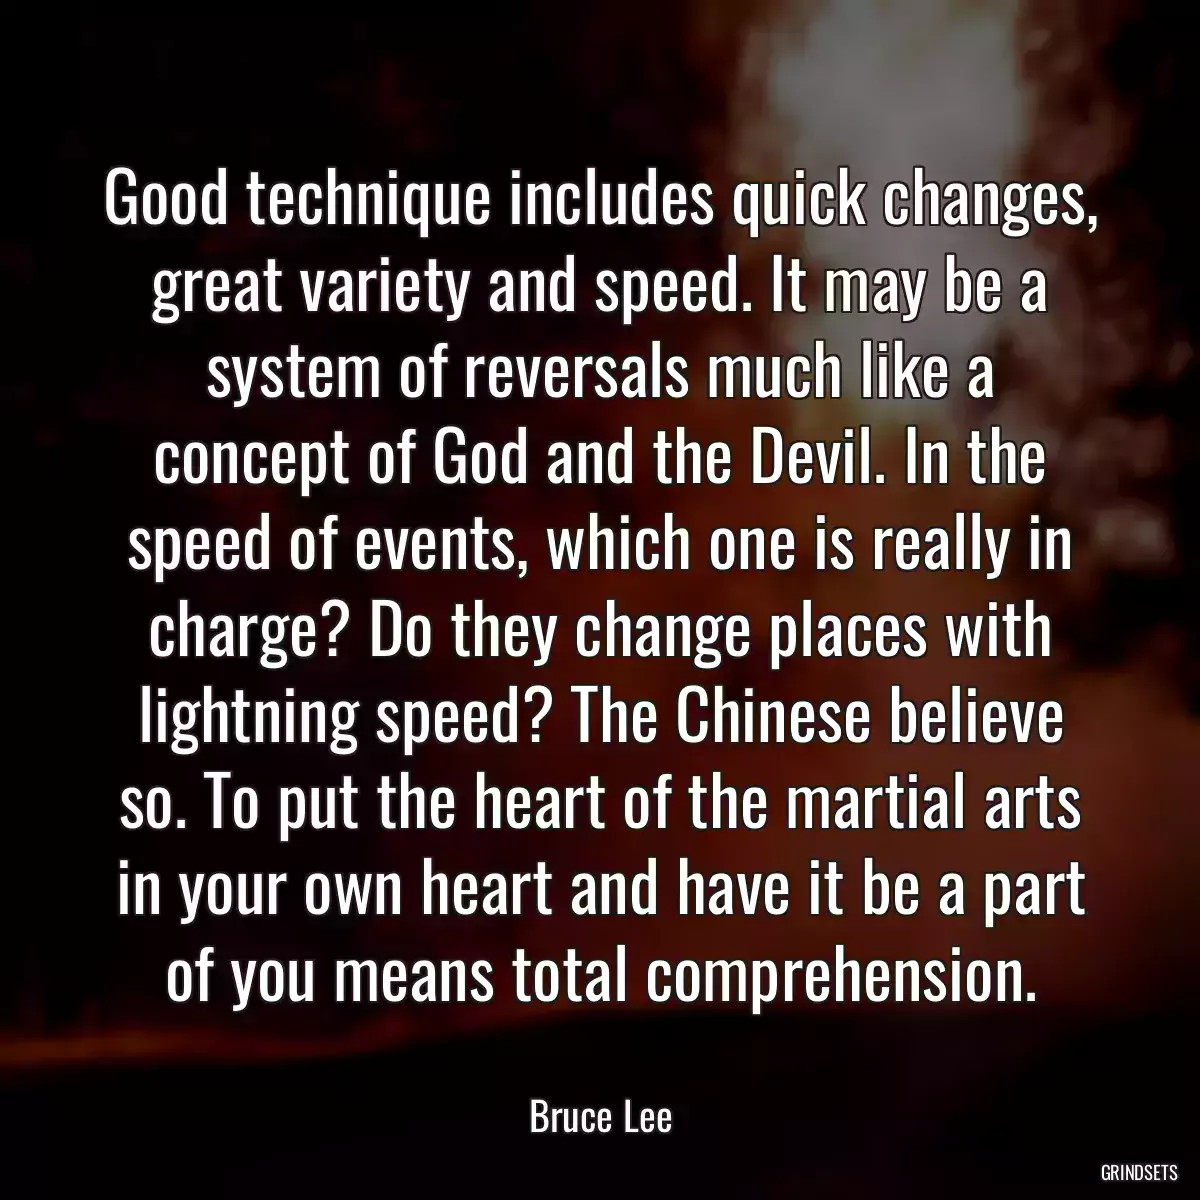 Good technique includes quick changes, great variety and speed. It may be a system of reversals much like a concept of God and the Devil. In the speed of events, which one is really in charge? Do they change places with lightning speed? The Chinese believe so. To put the heart of the martial arts in your own heart and have it be a part of you means total comprehension.